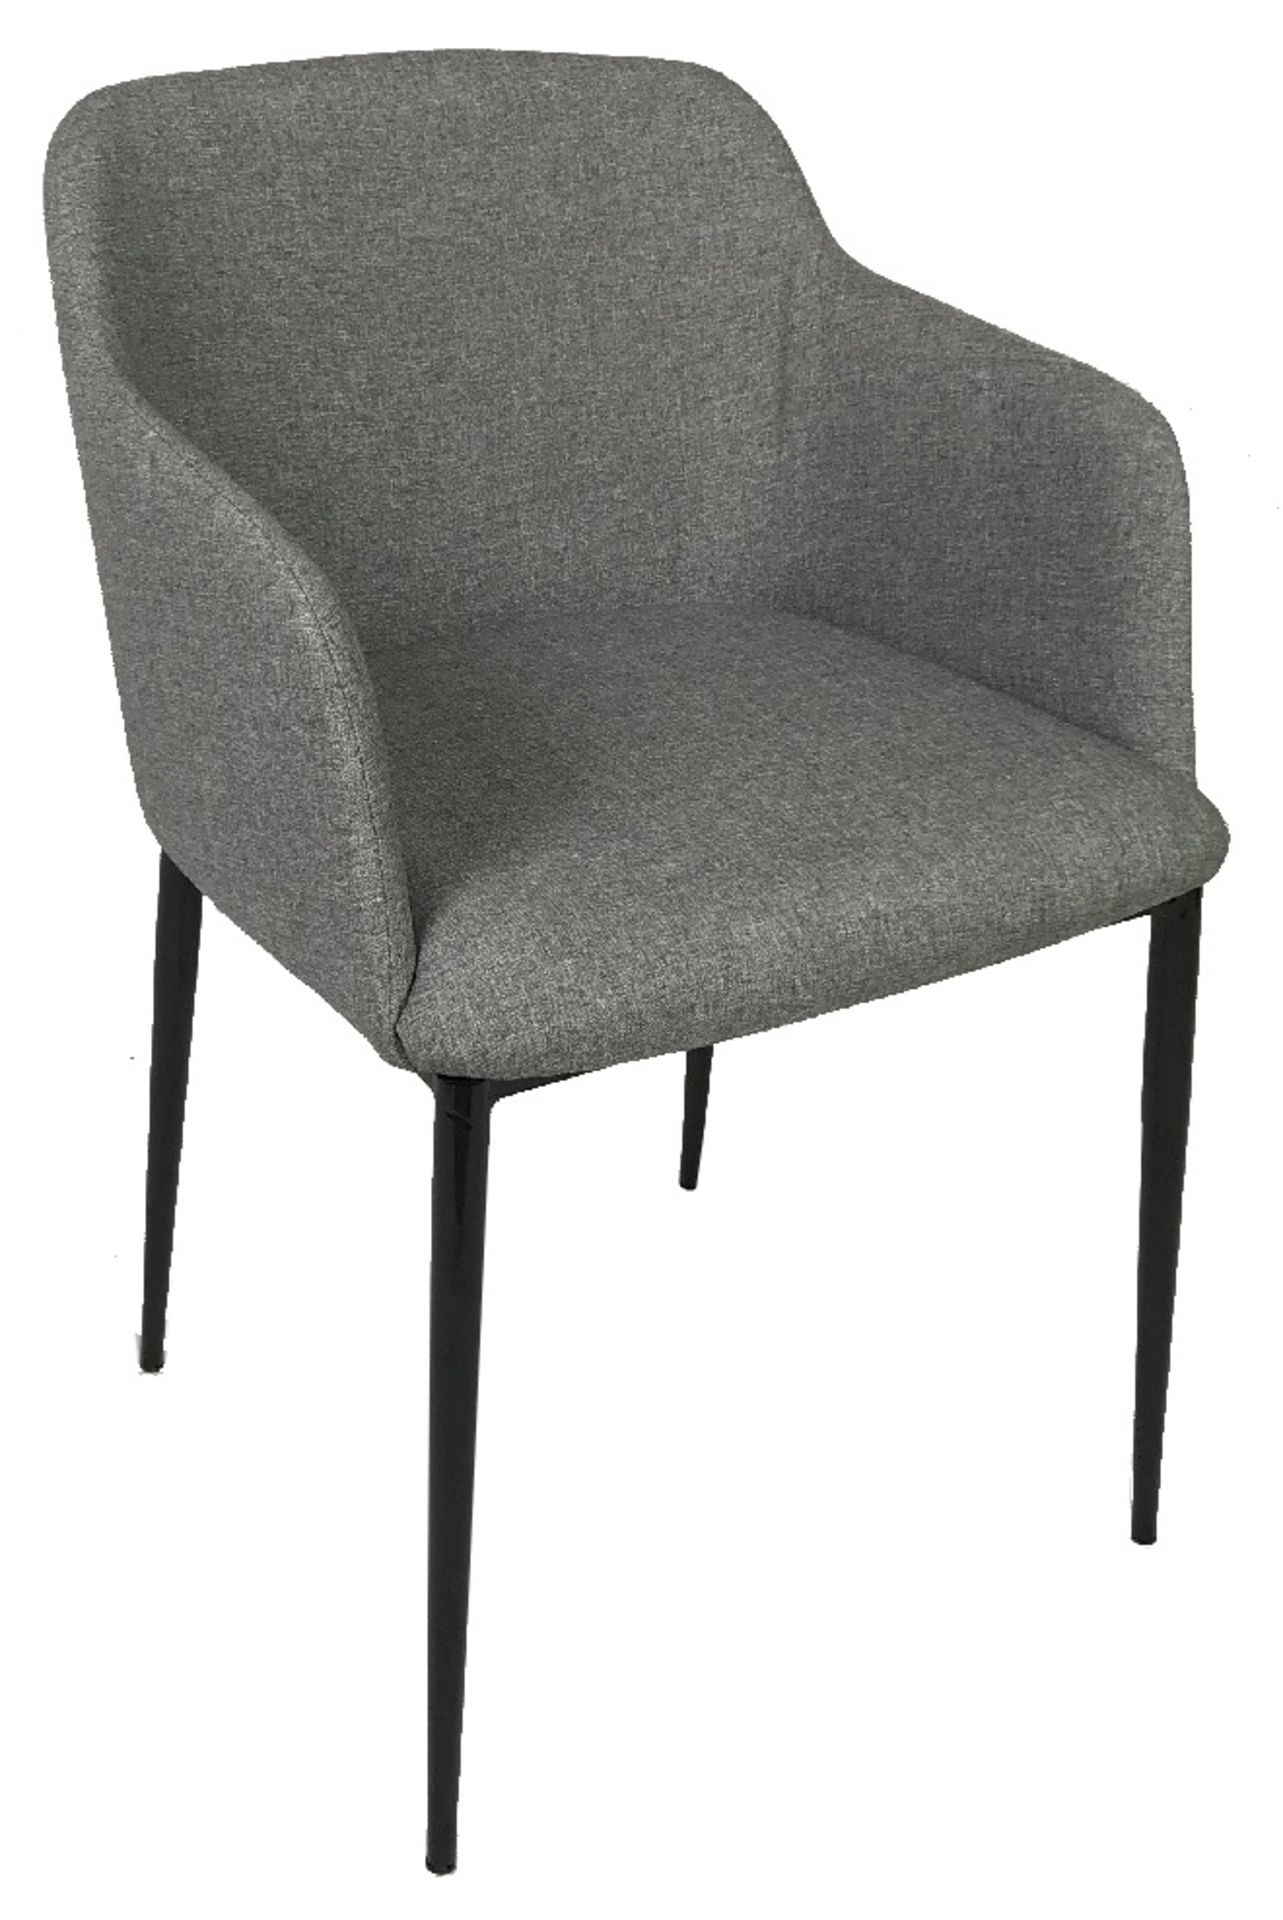 6 x FLANDERS Upholstered Contemporary Dining Chairs With Arms In Grey Fabric, With Slender Black